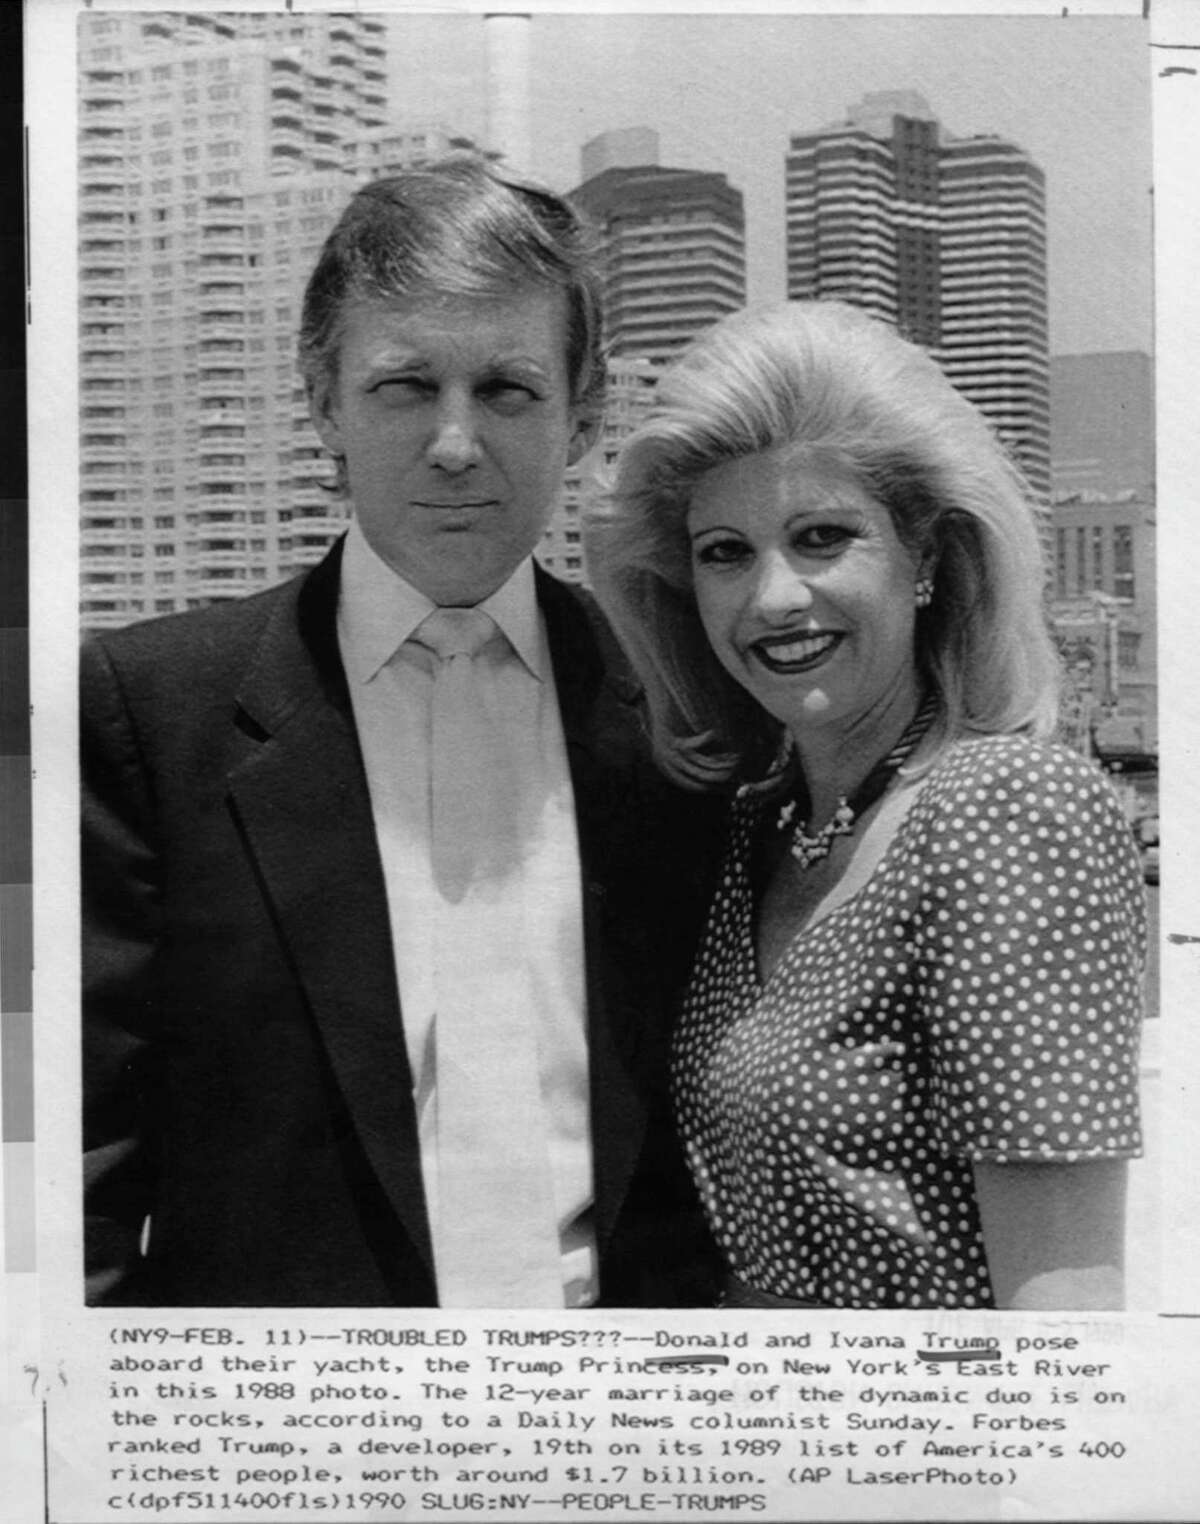 Donald and Ivana Trump pose aboard their yacht, the Trump Princess, in 1988. New reporting photo. The 12-year marriage of the dynamic duo is on the rocks, according to a Daily News columnist Sunday. Forbes ranked Trump, a developer, 19th on its 1989 list of America's 400 richest people, worth around $1.7 billion. AP LaserPhoto. HOUCHRON CAPTION (01/20/2002): Donald and Ivana Trump's marital meltdown was news.